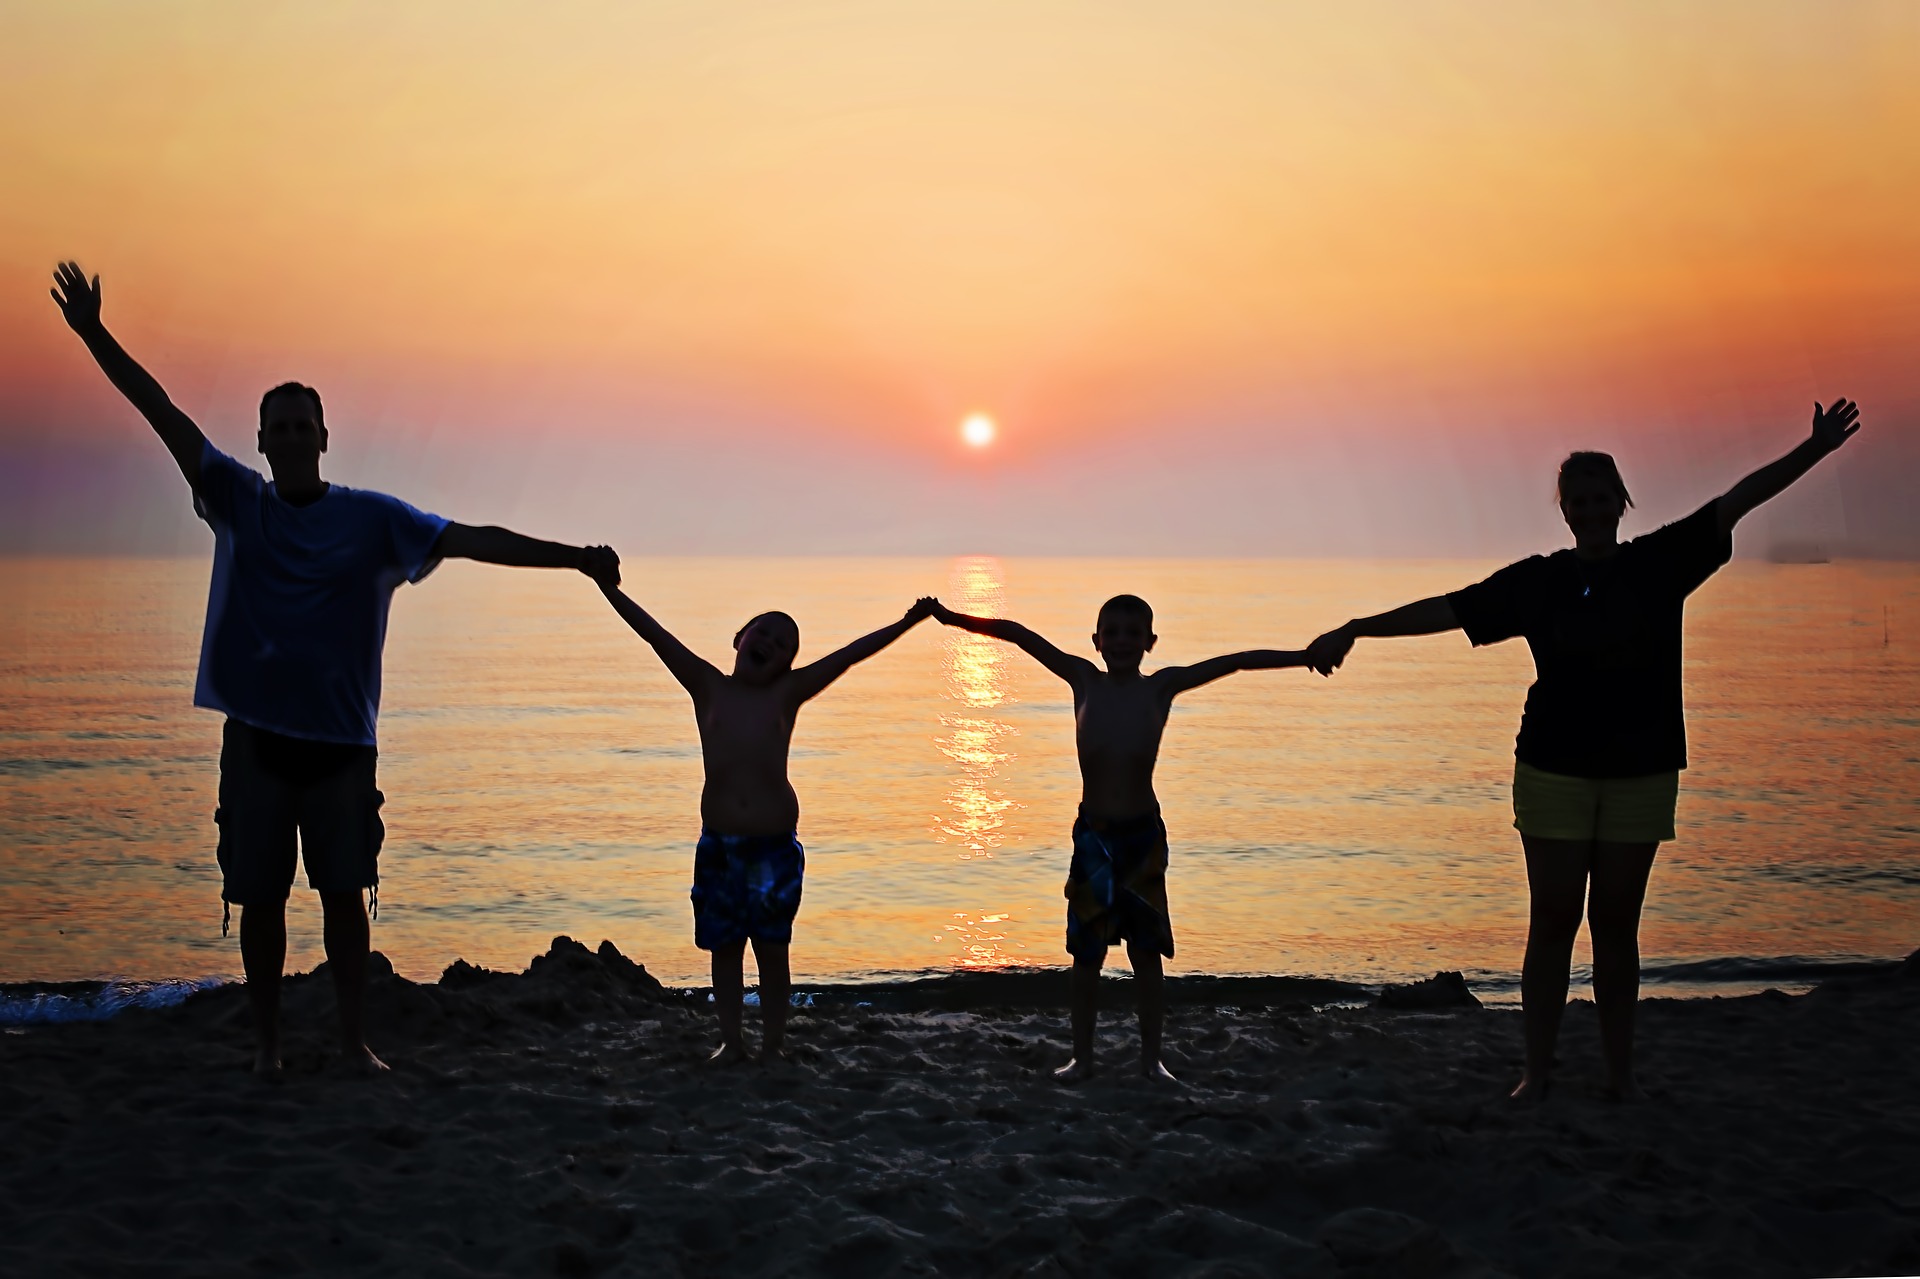 A family of four, a father, two kids, and a mother, hold hands and lift their arms in the air as they pose in front of a sunset on the water.